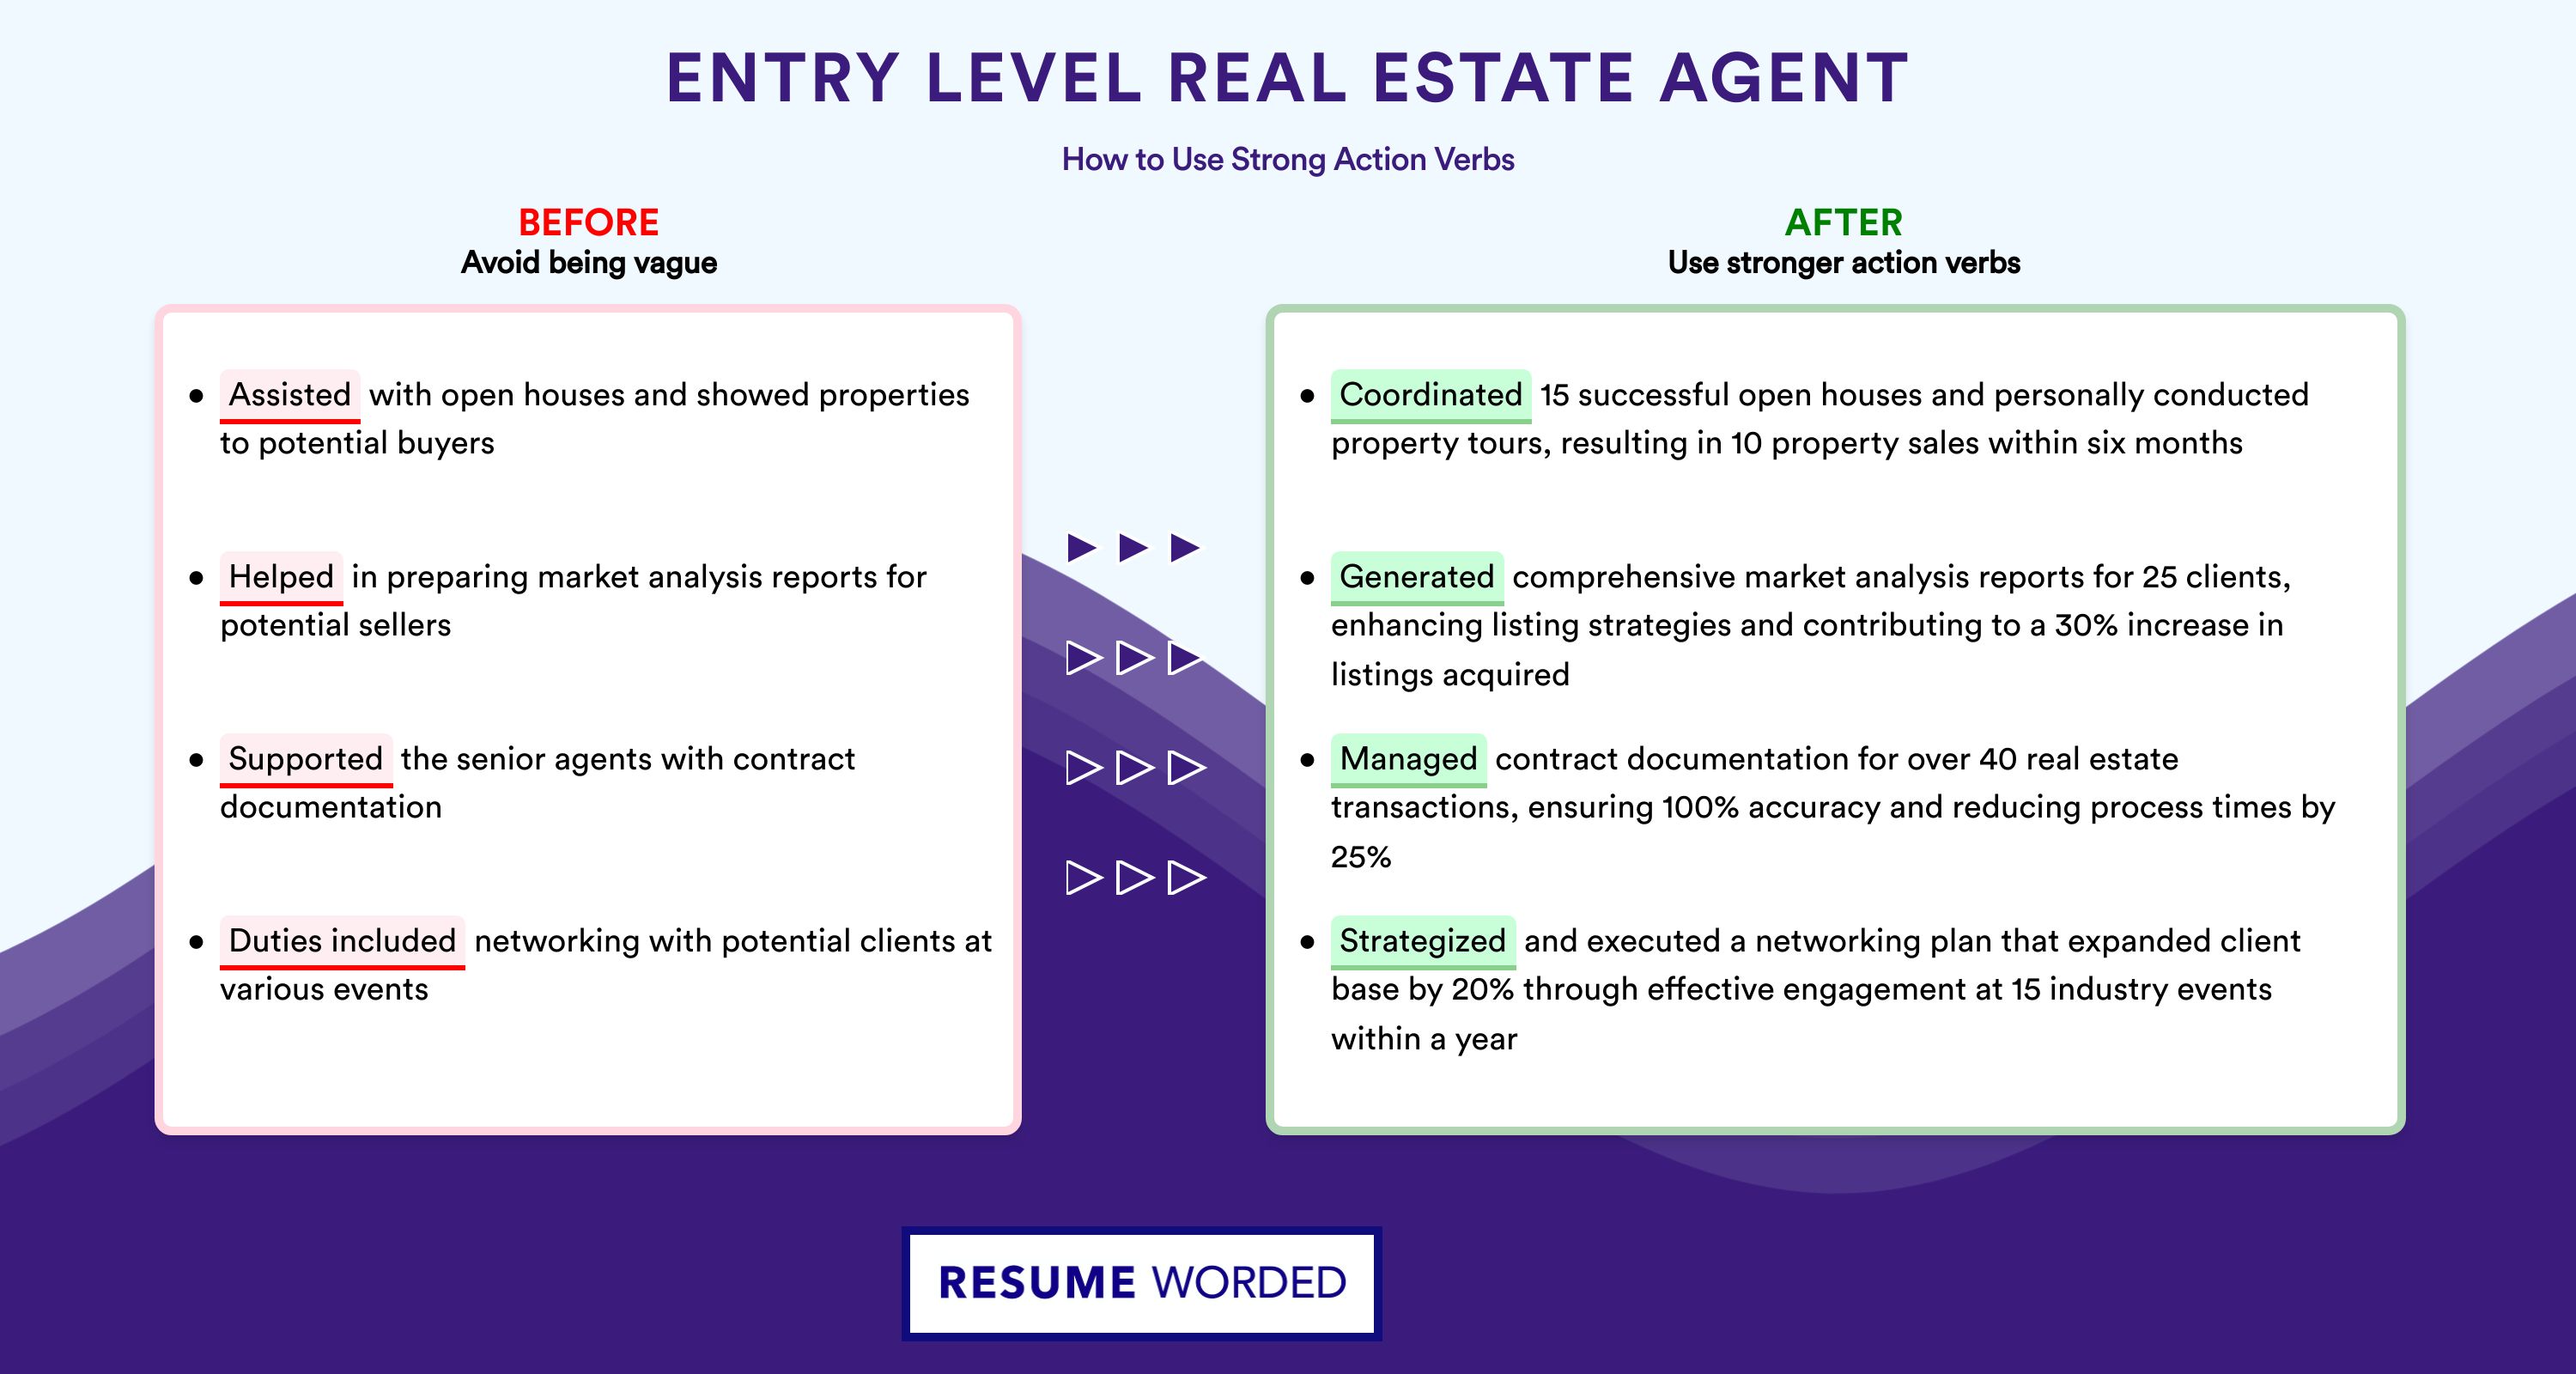 Action Verbs for Entry Level Real Estate Agent